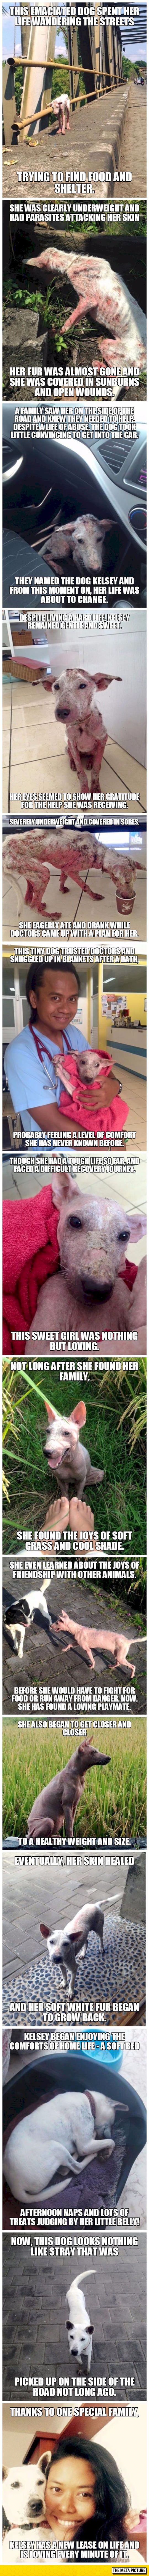 A Story of a Stray Dog… Faith in Humanity Restored *CRYING SO MUCH TEARS* BRAVISSIMO.